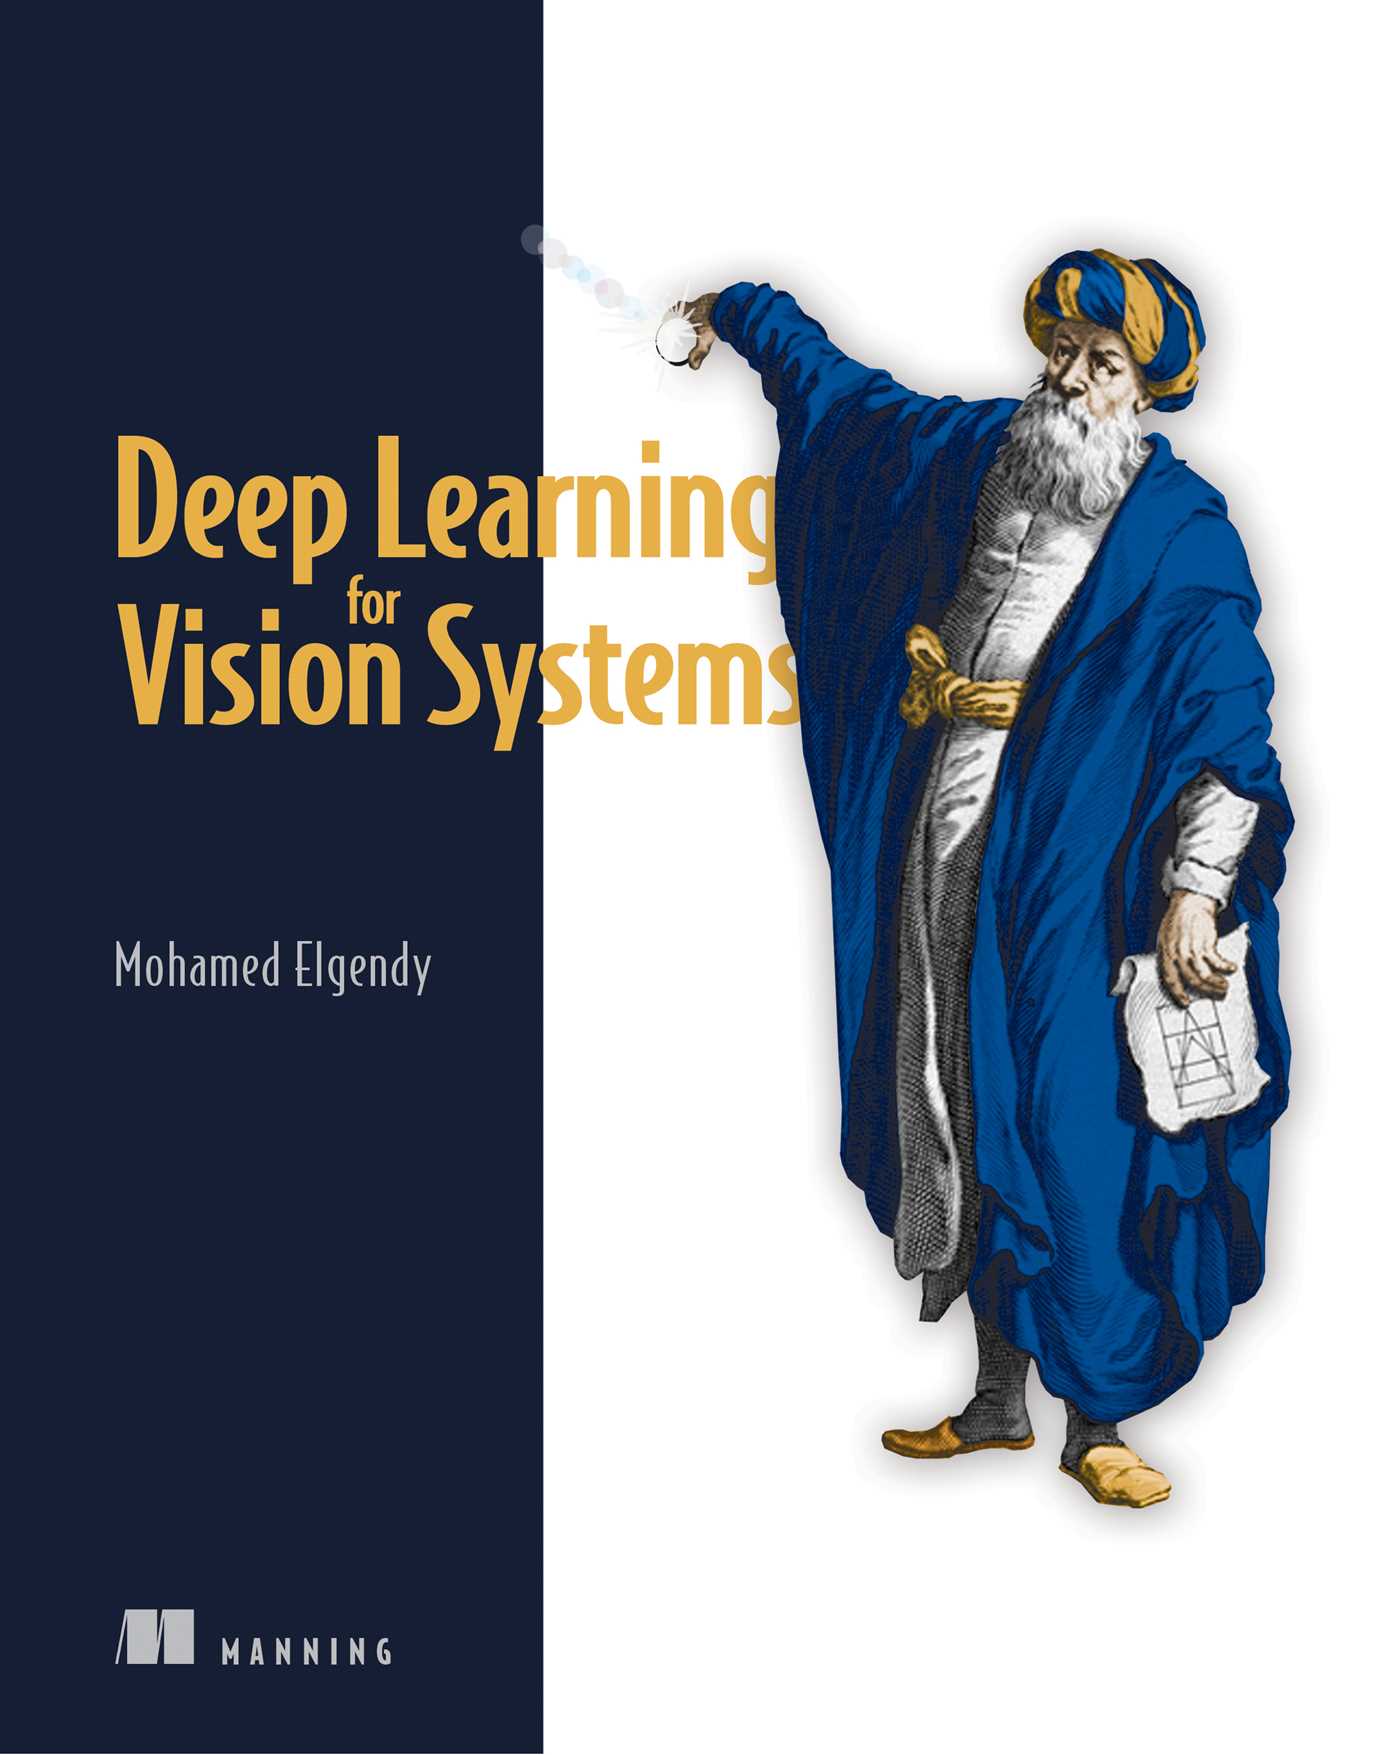 Deep learning for vision systems- computer vision book